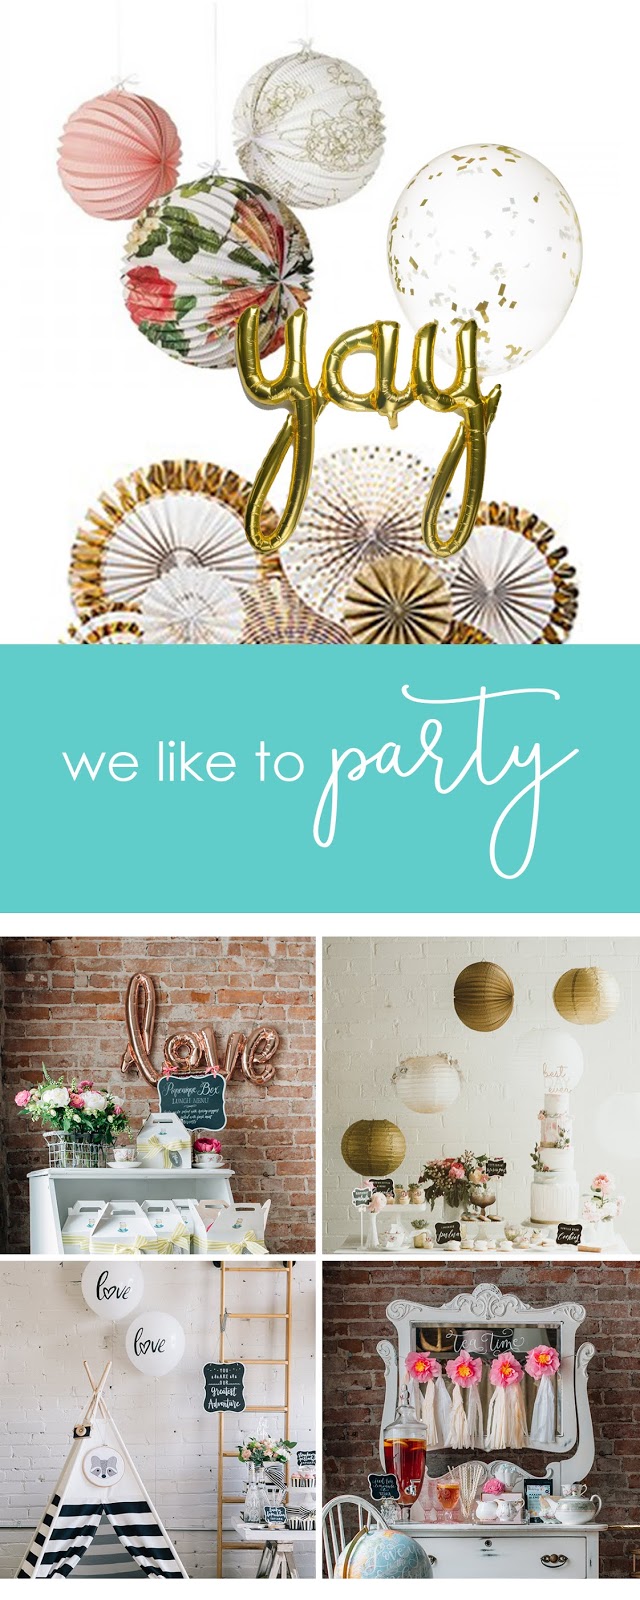 We love to party! Party decorating inspiration and supplies from Creative Bag.